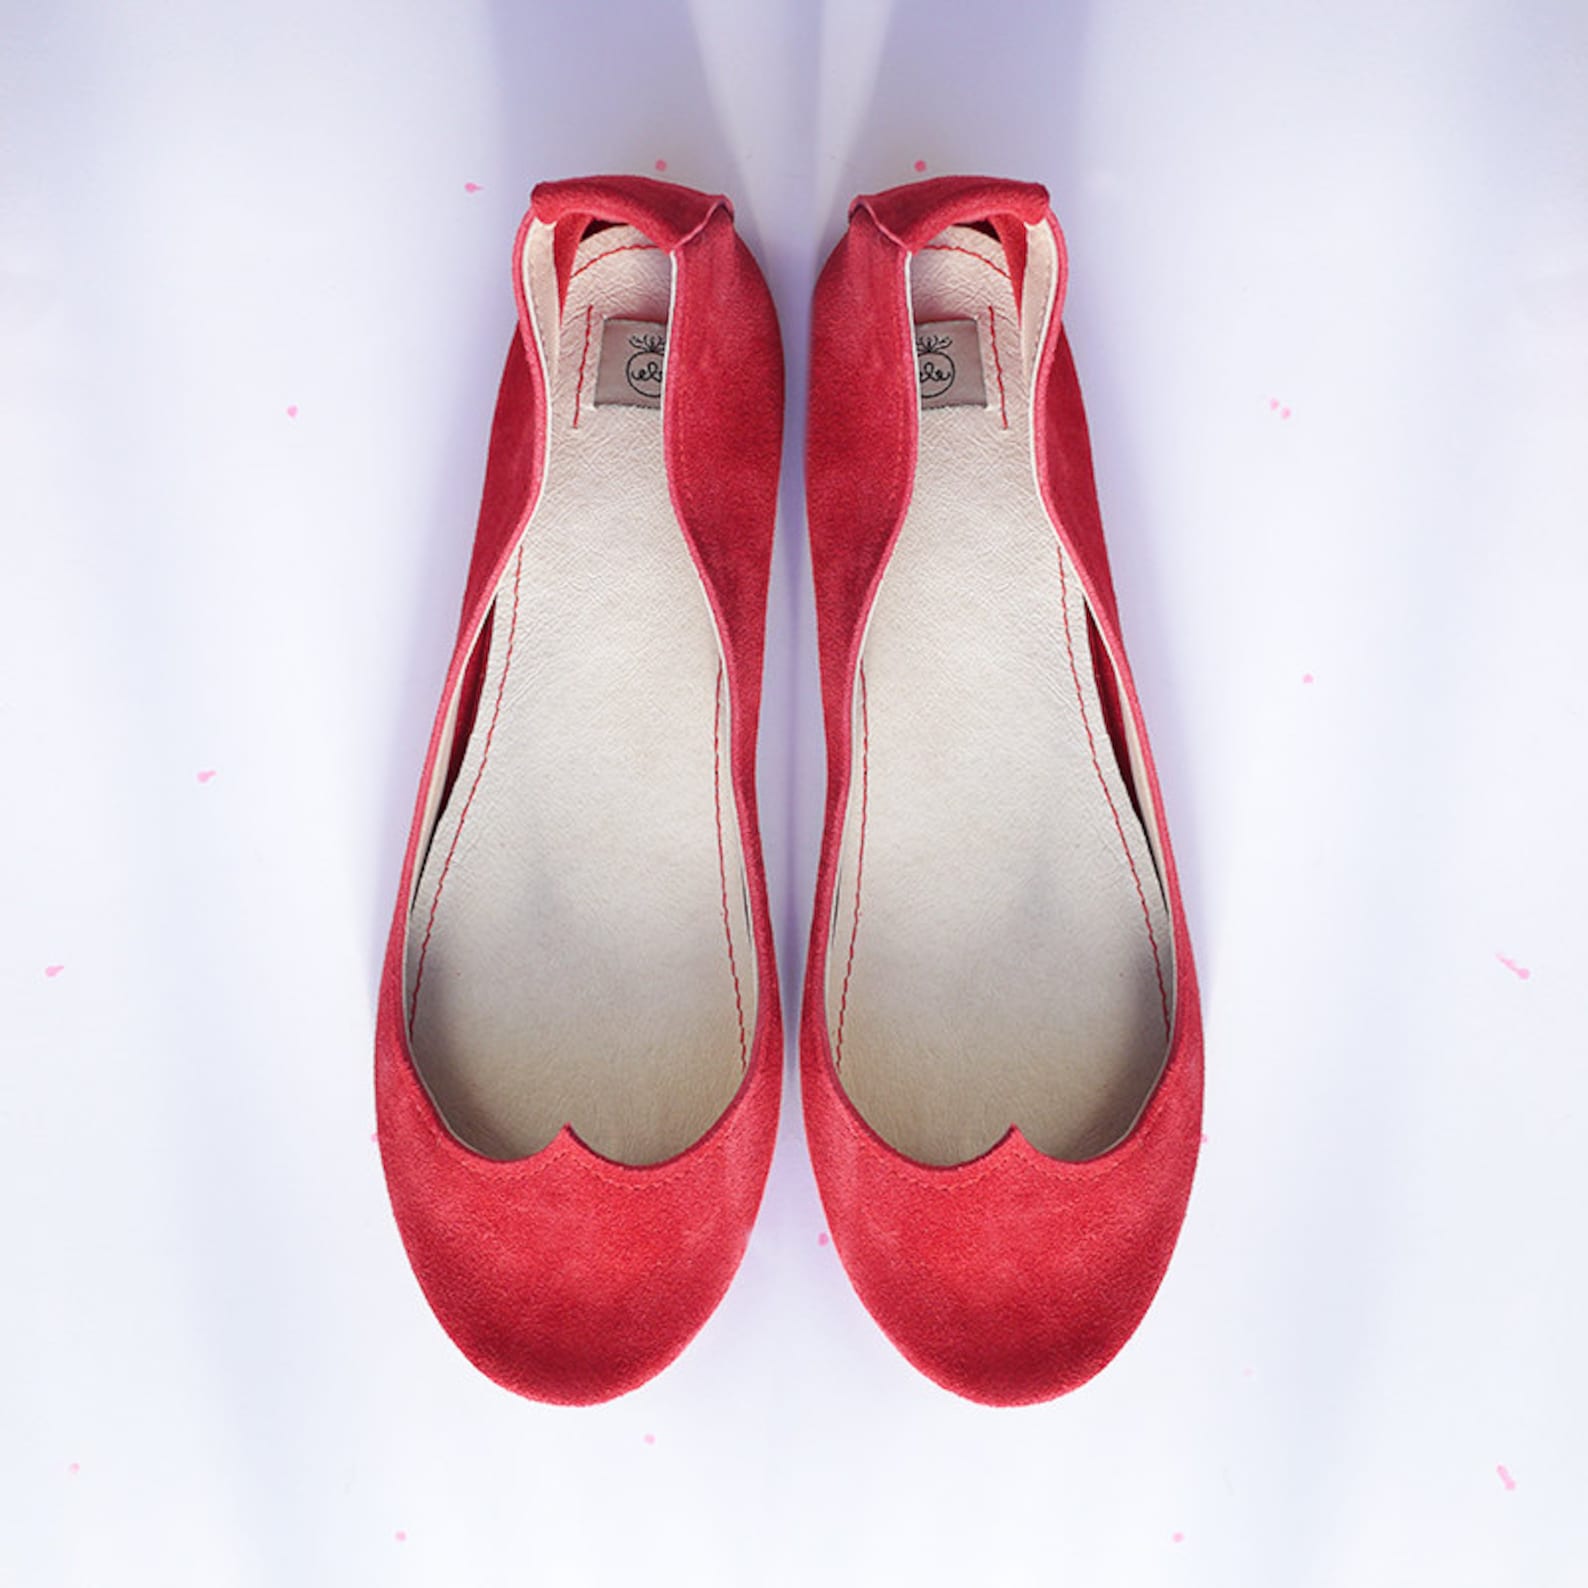 red ballet shoes. ballet flats. leather flats. red shoes. wedding shoes. bridal shoes. gift for her. personalized gift. handmade